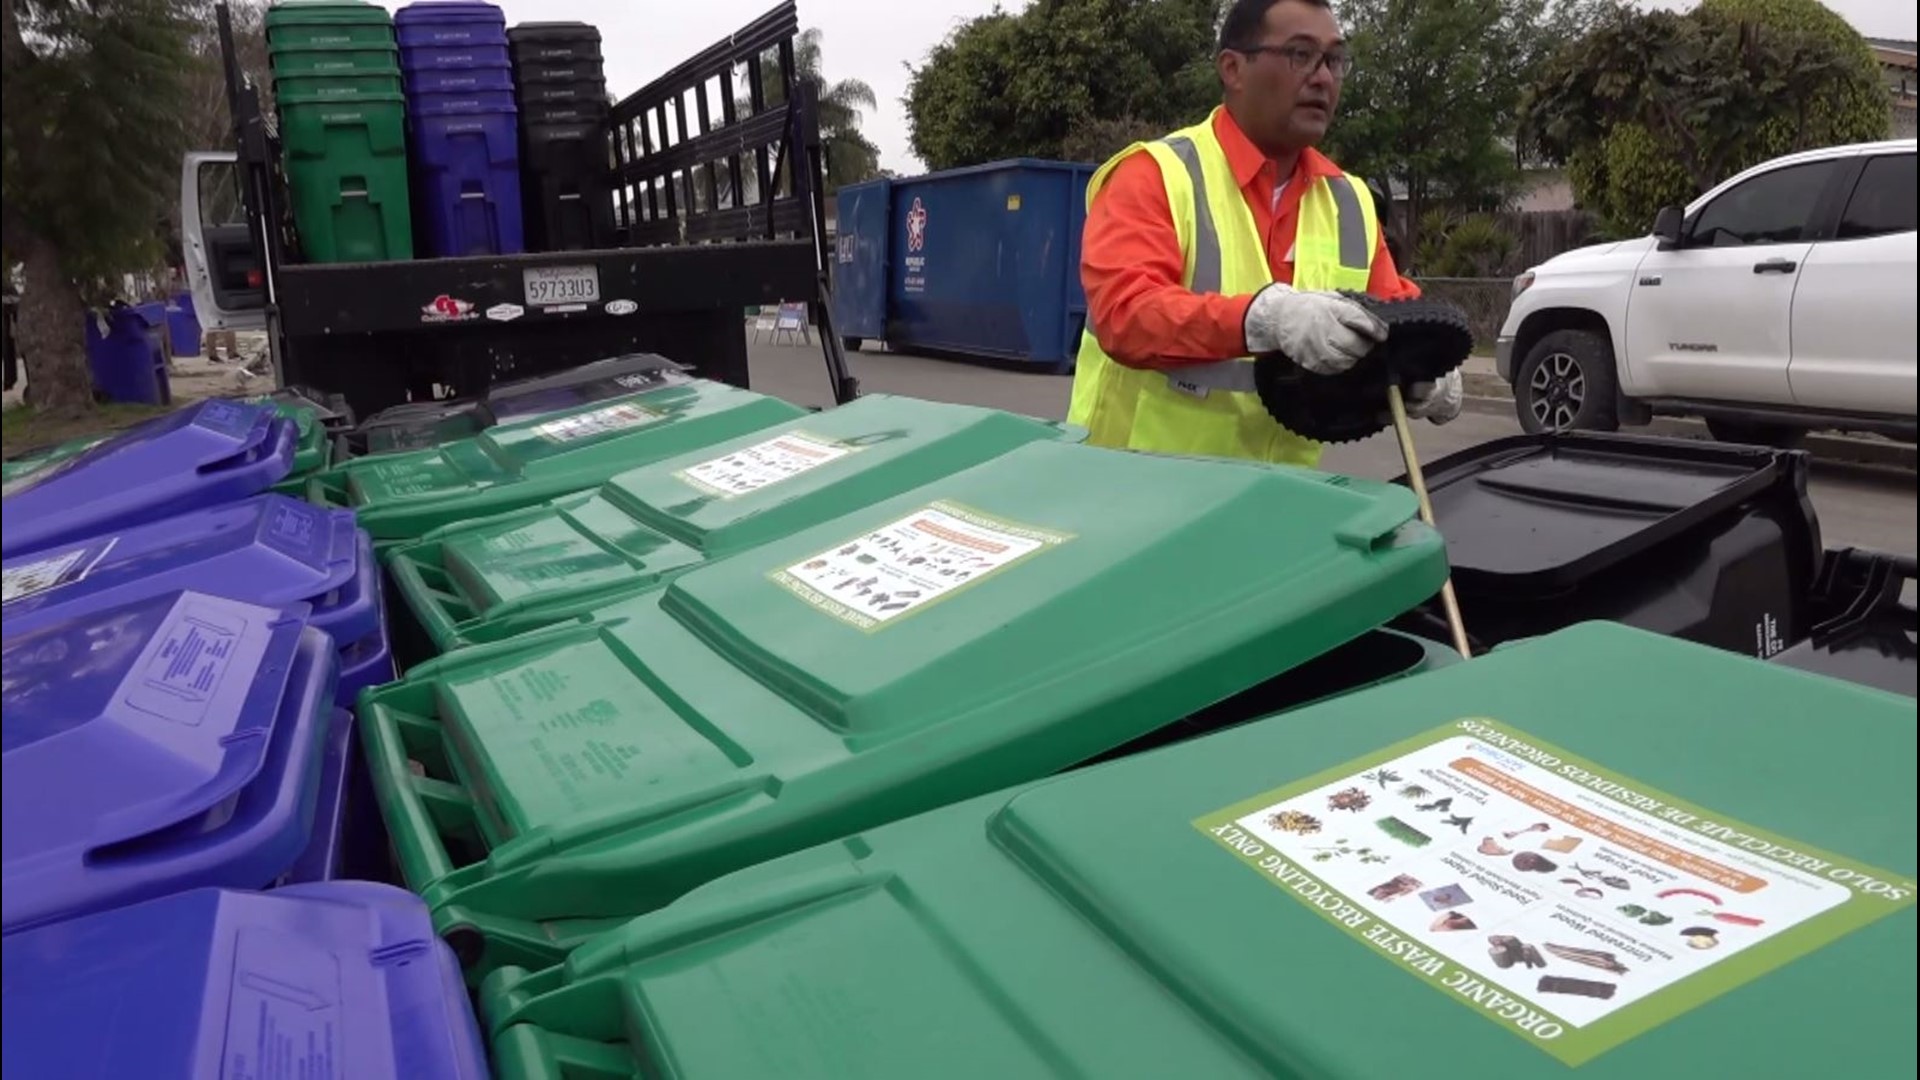 Nearly a month after the unprecedented floods throughout San Diego County, city crews are giving out free trash cans and replacement bins.